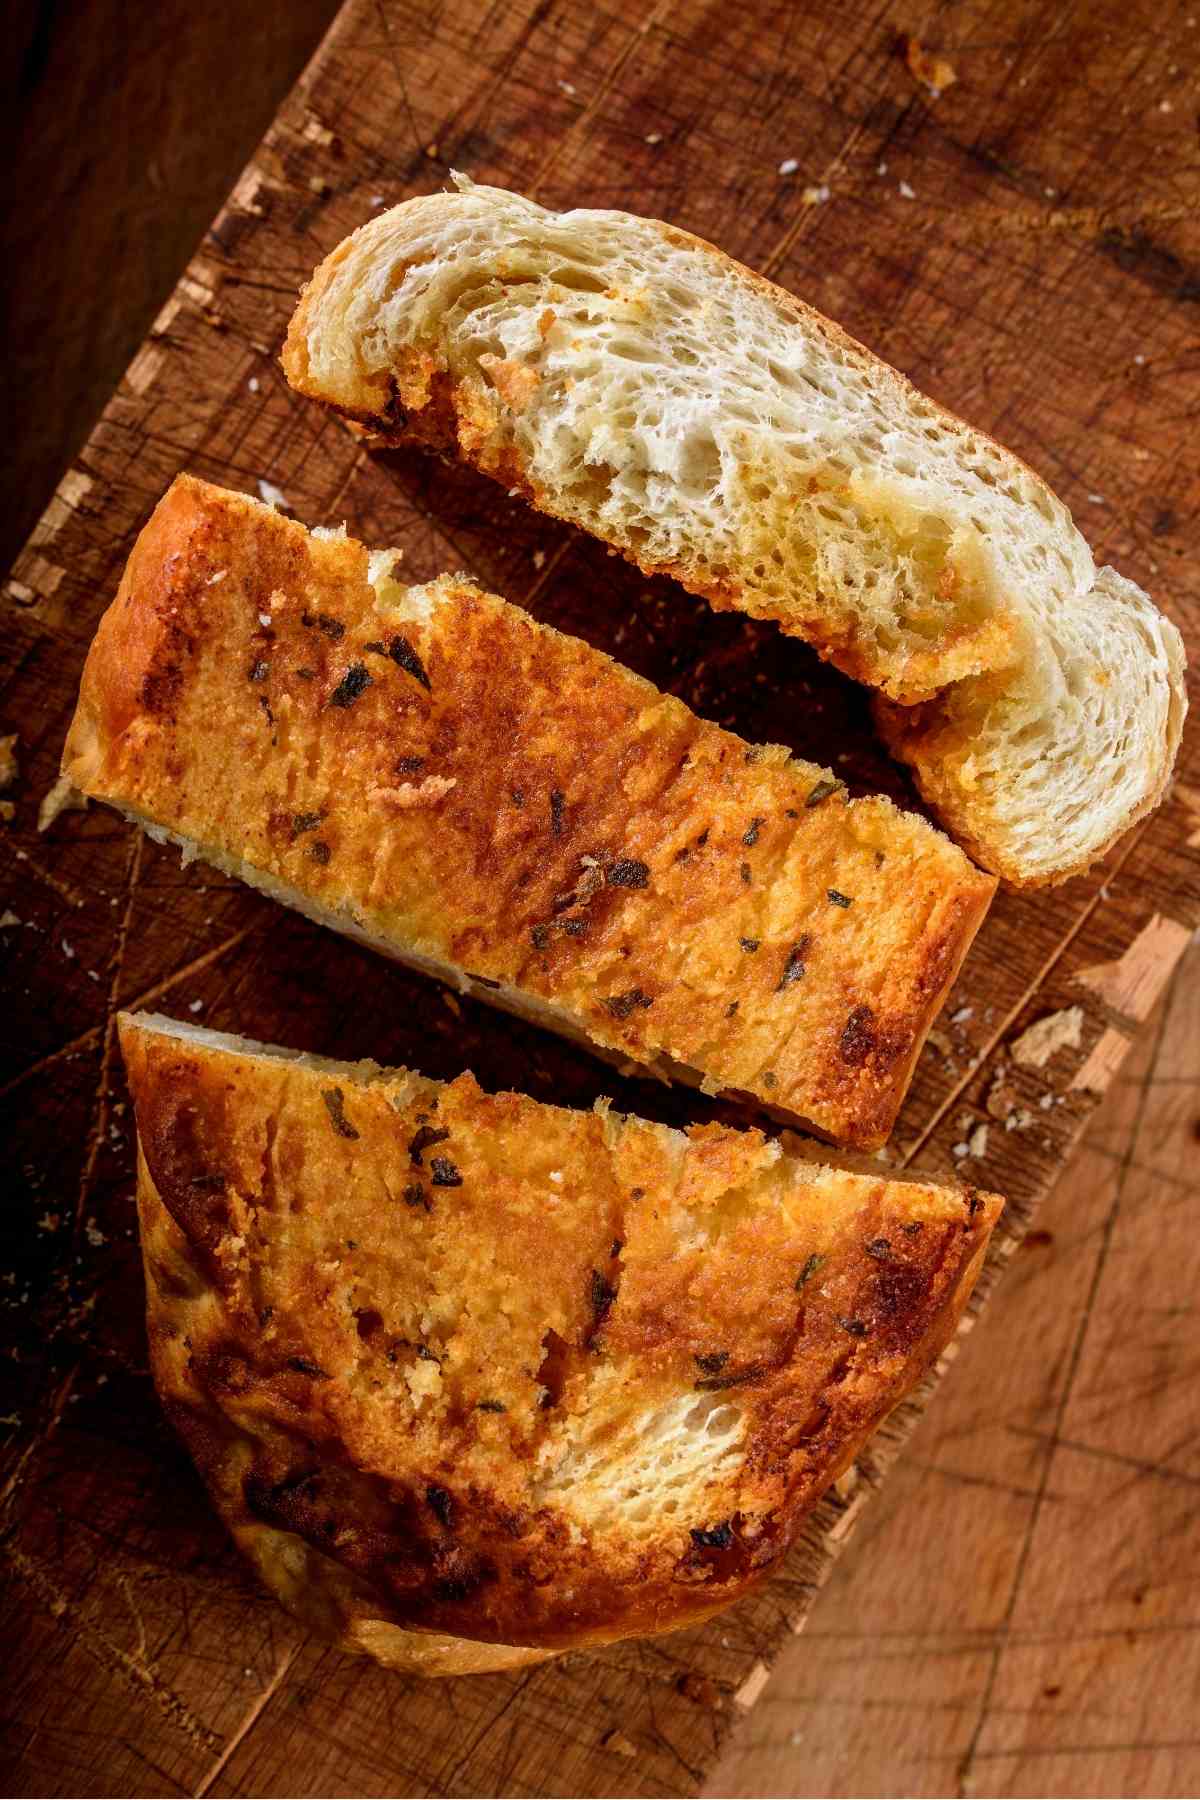 Crisp and buttery garlic bread is a side dish to enjoy with just about anything. Try something new by making garlic bread from a loaf of sourdough! It’s loaded with savory garlic flavor and has a wonderful crispy texture.